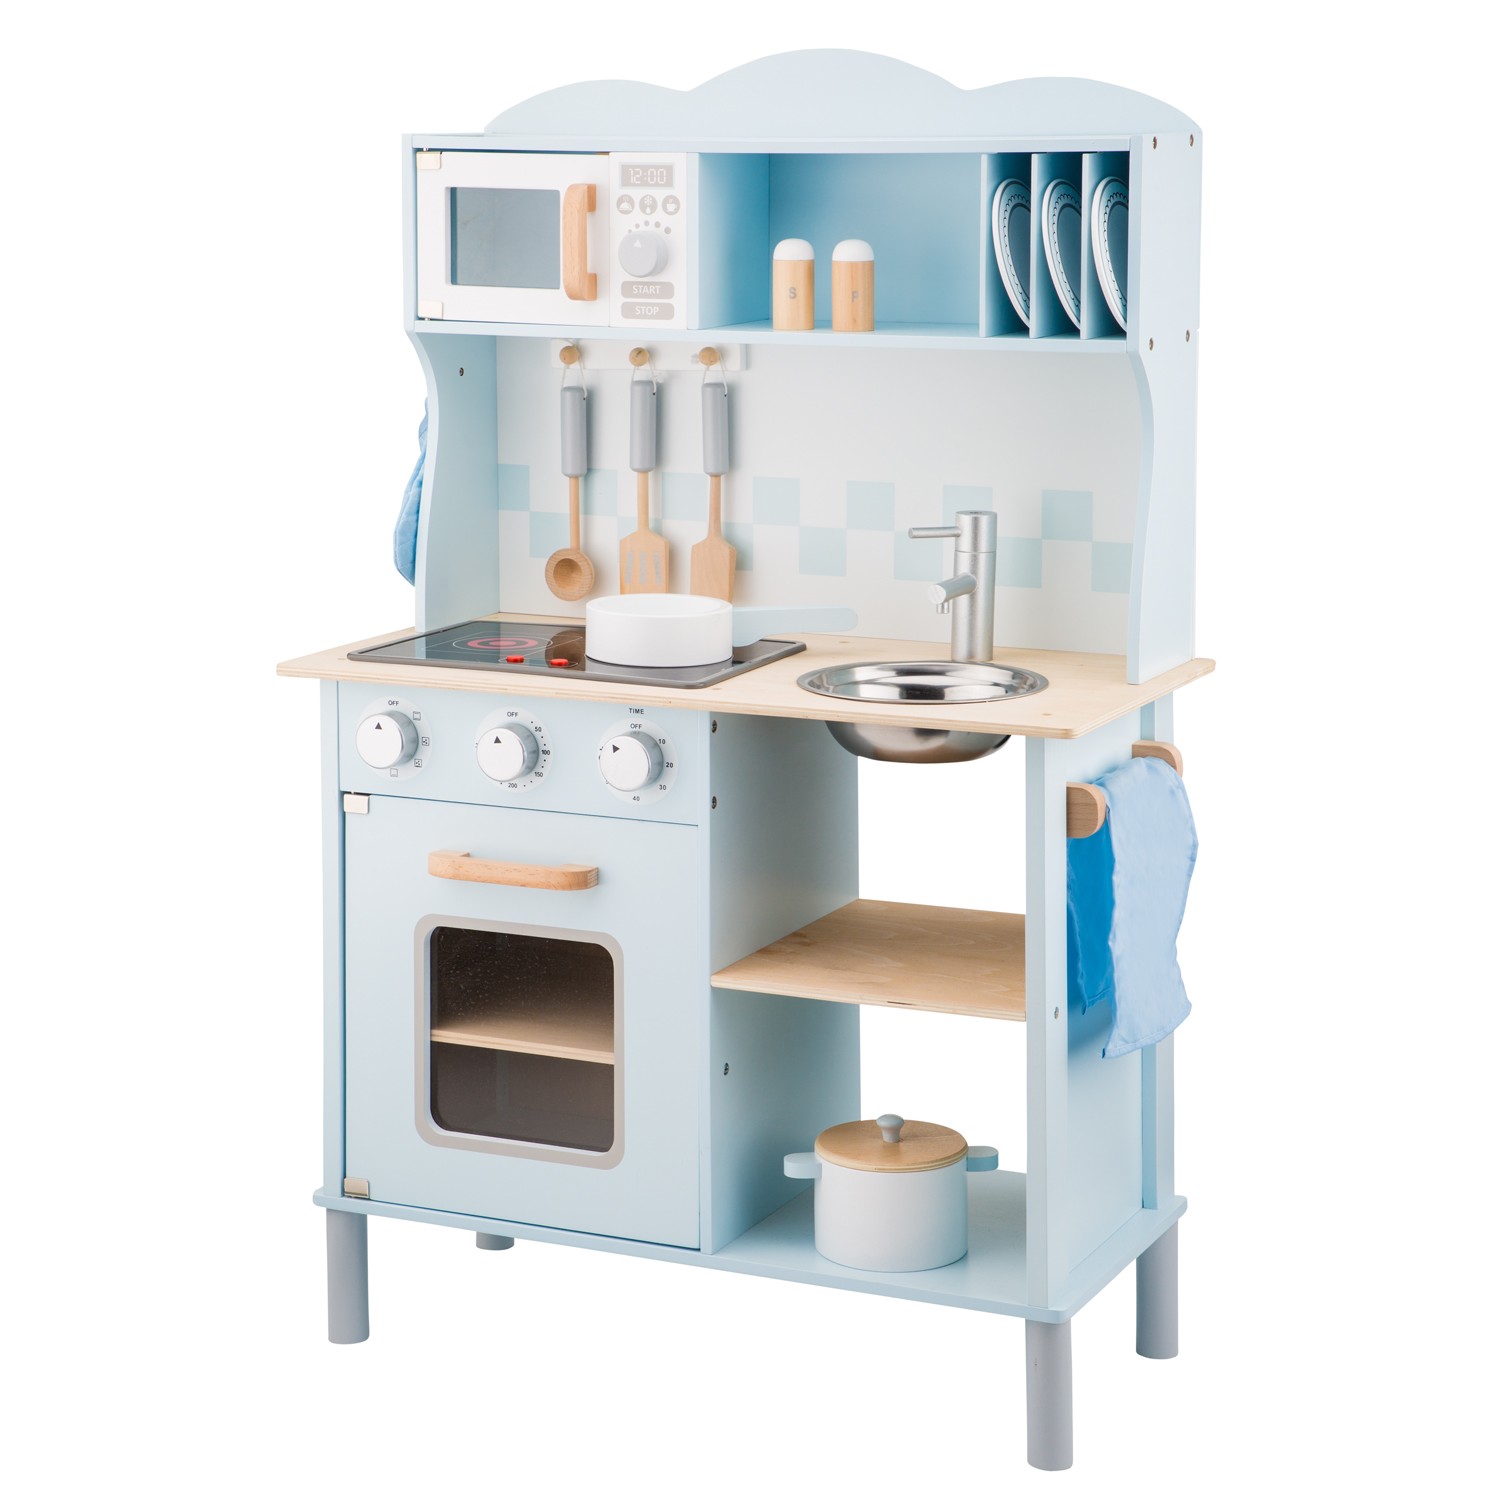 11065 Colore Blu New Classic Toys Kitchenette-Modern-Electric Cooking 